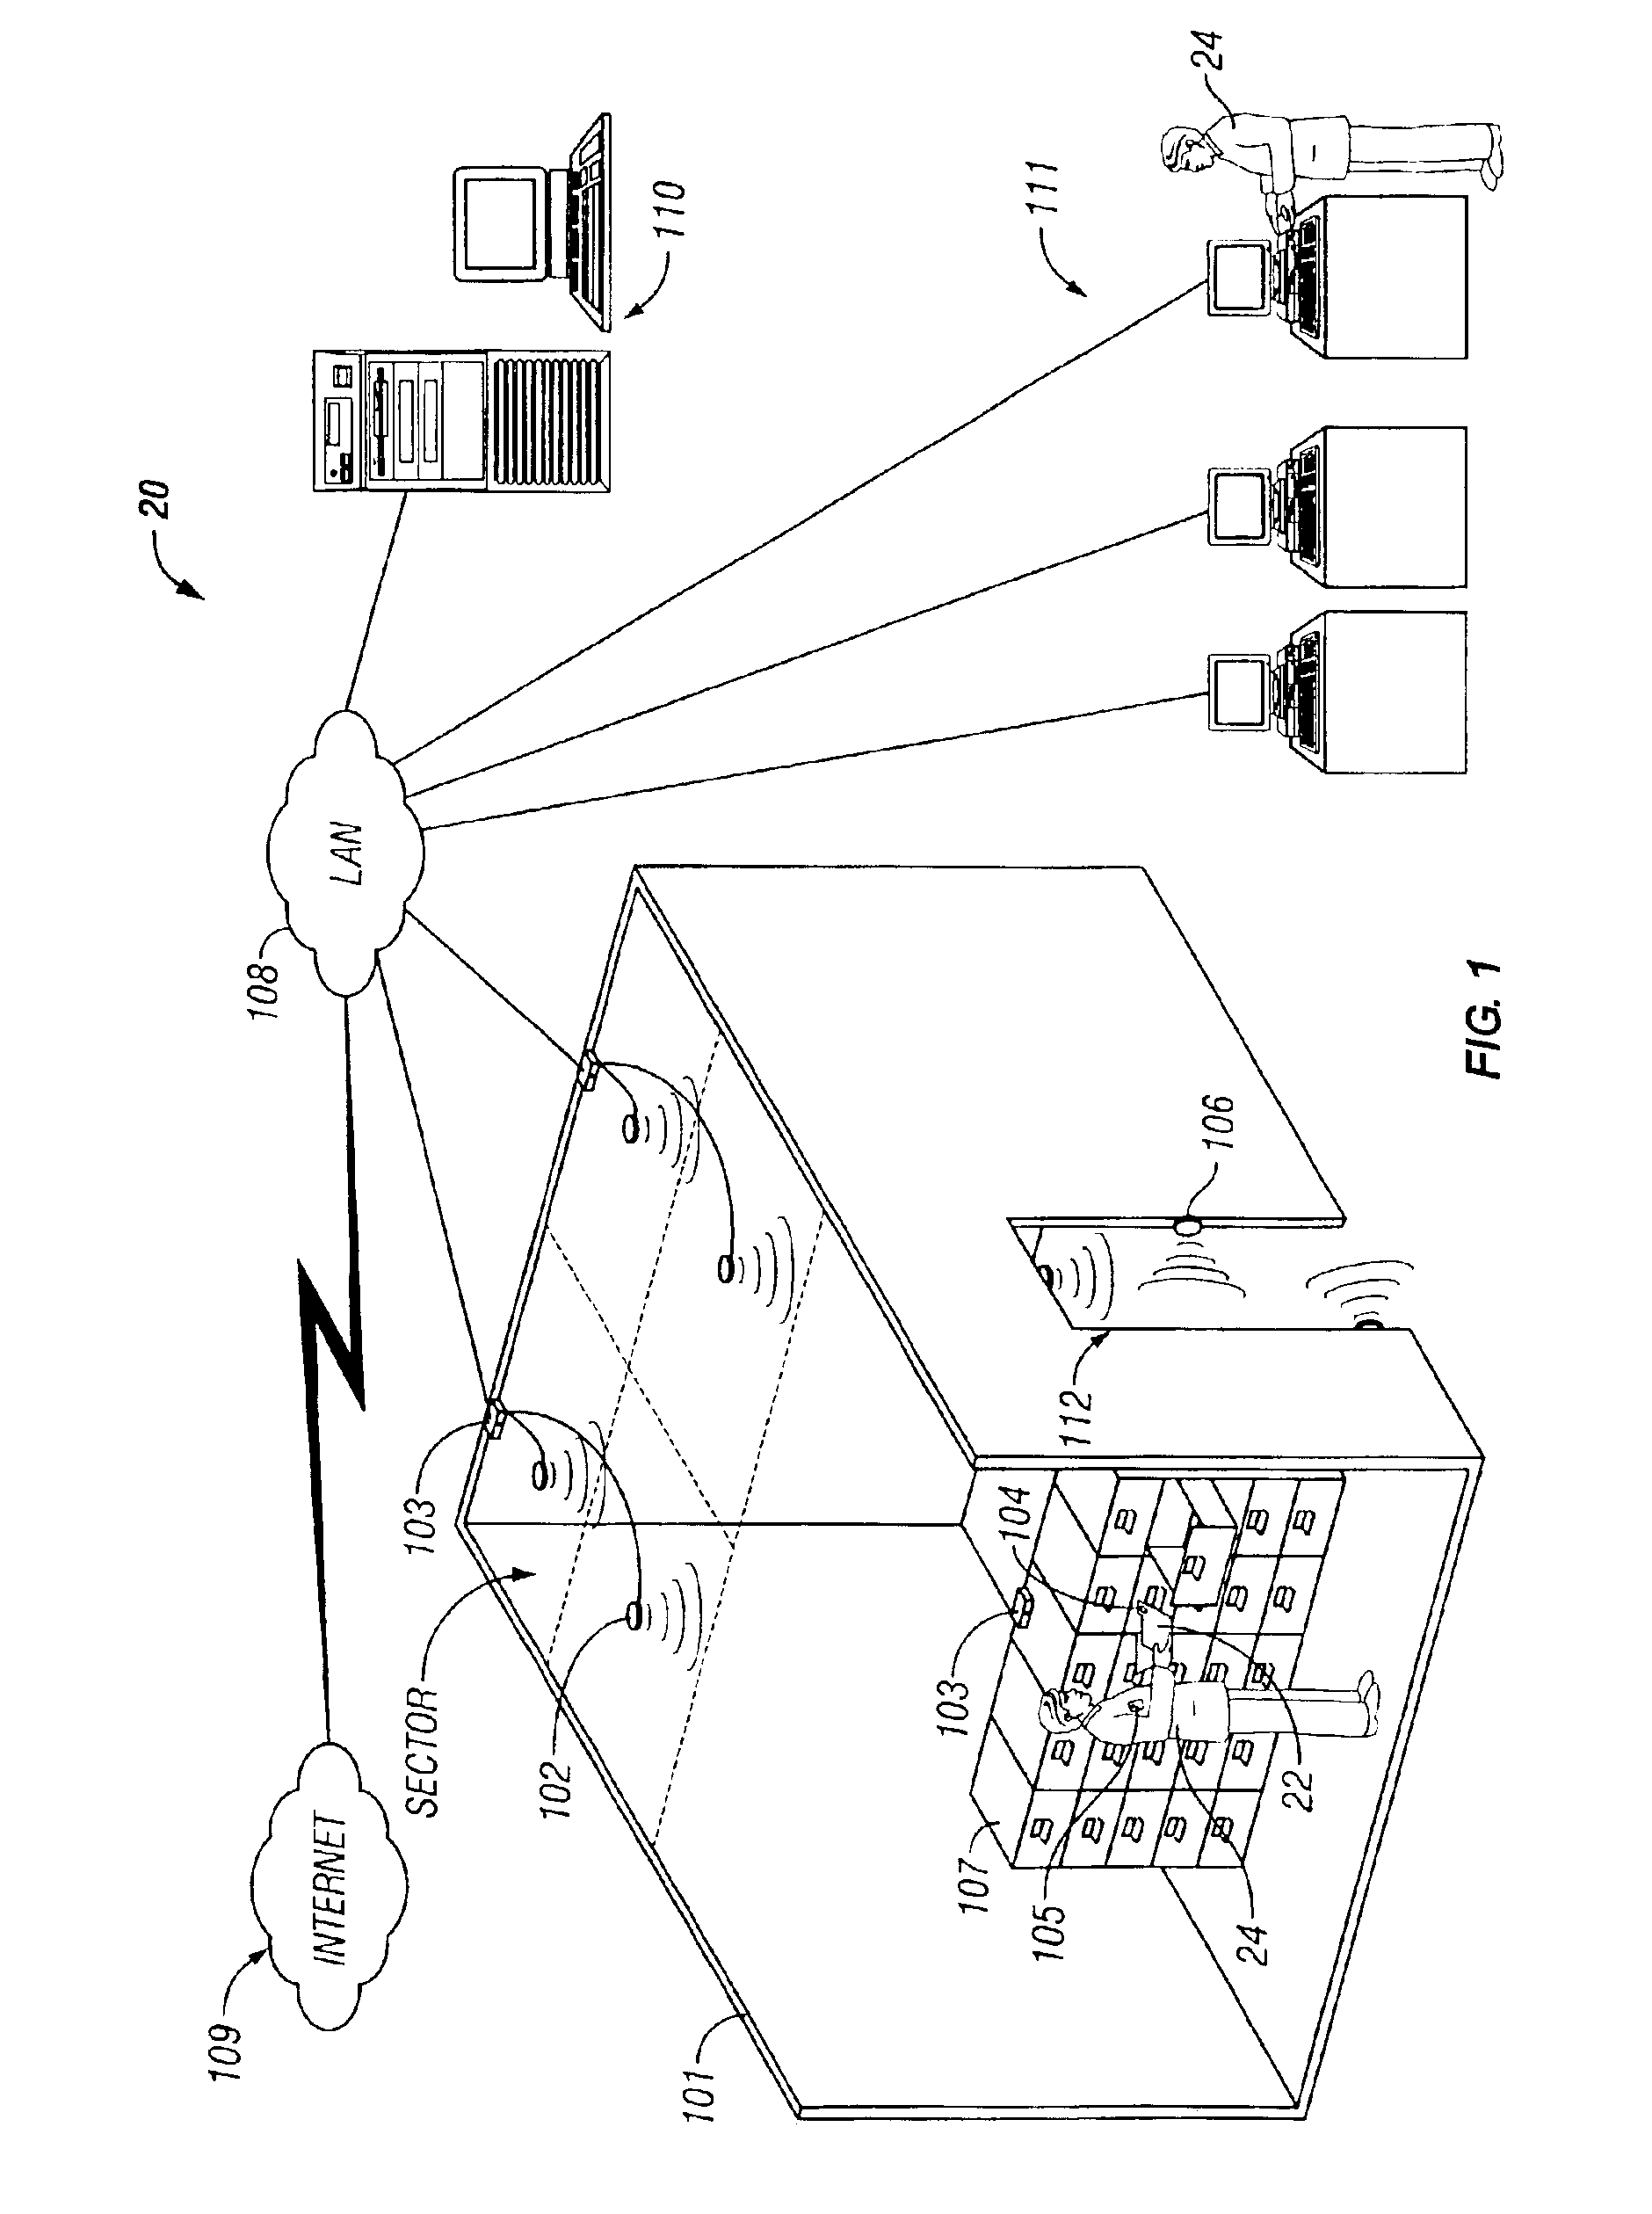 Method and apparatus for tracking objects and people